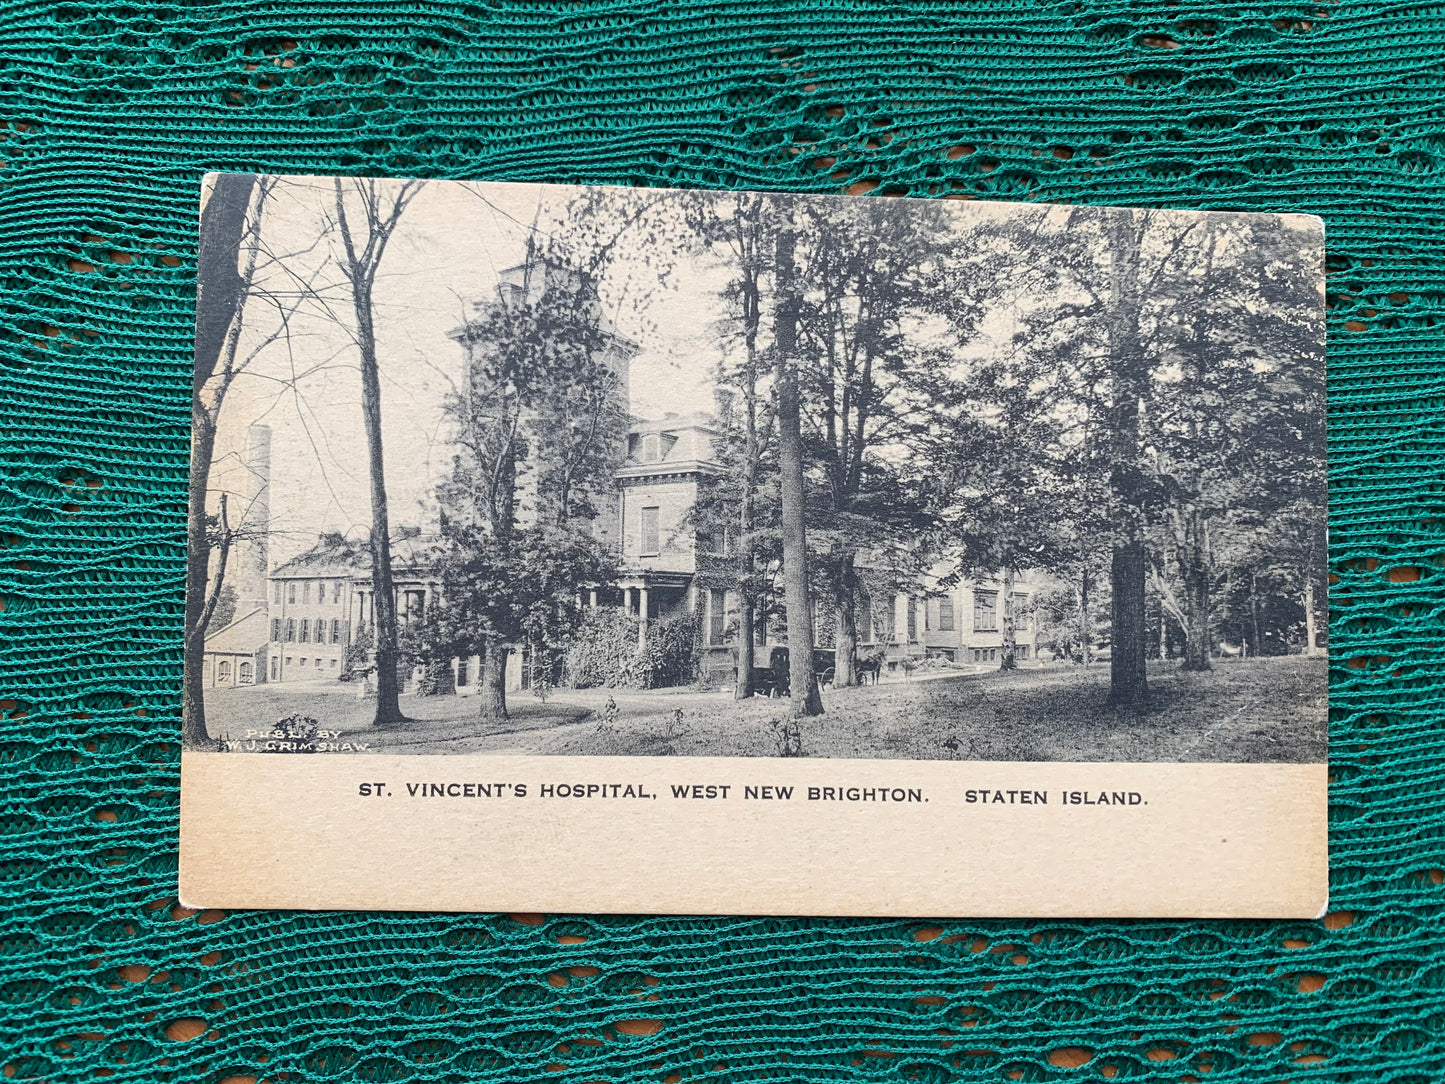 Old postcard - Antique postcard - ST.VINCENT'S HOSPITAL - WEST NEW BRIGHTON - STATEN ISLAND - early 1900s - Unused